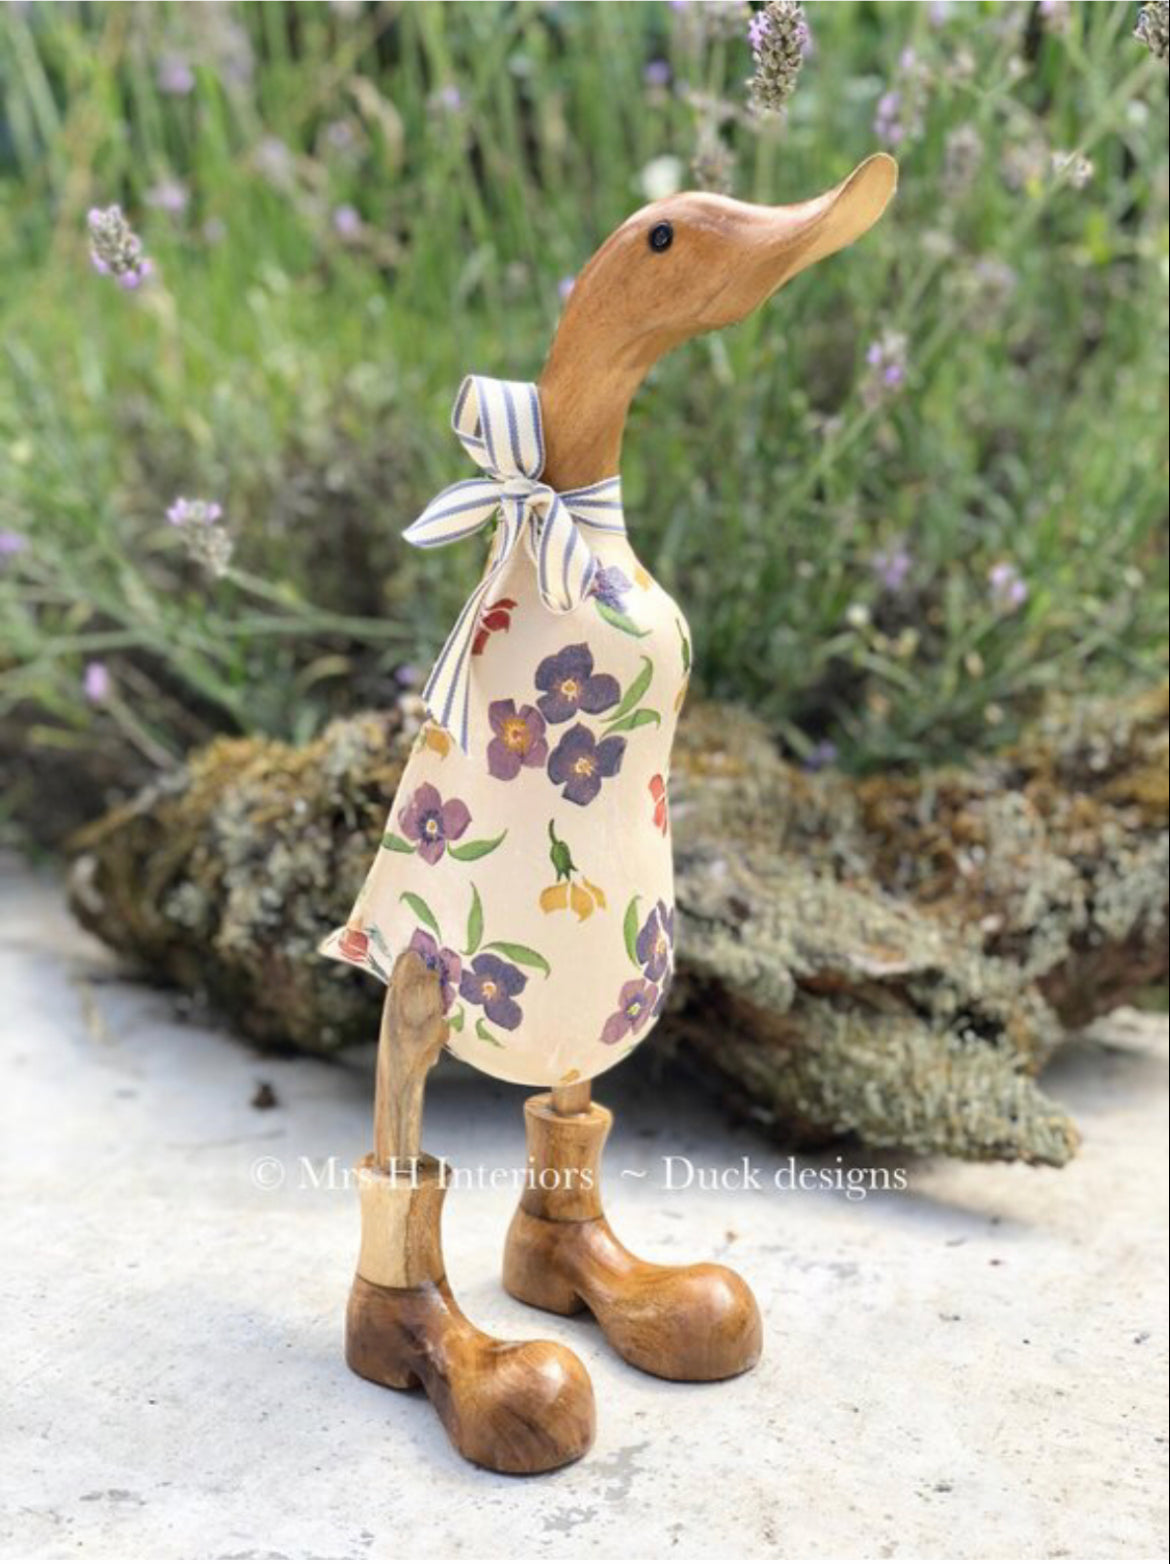 Emma Bridgewater Outdoor Ducks -  - Decorated Wooden Duck in Boots by Mrs H the Duck Lady